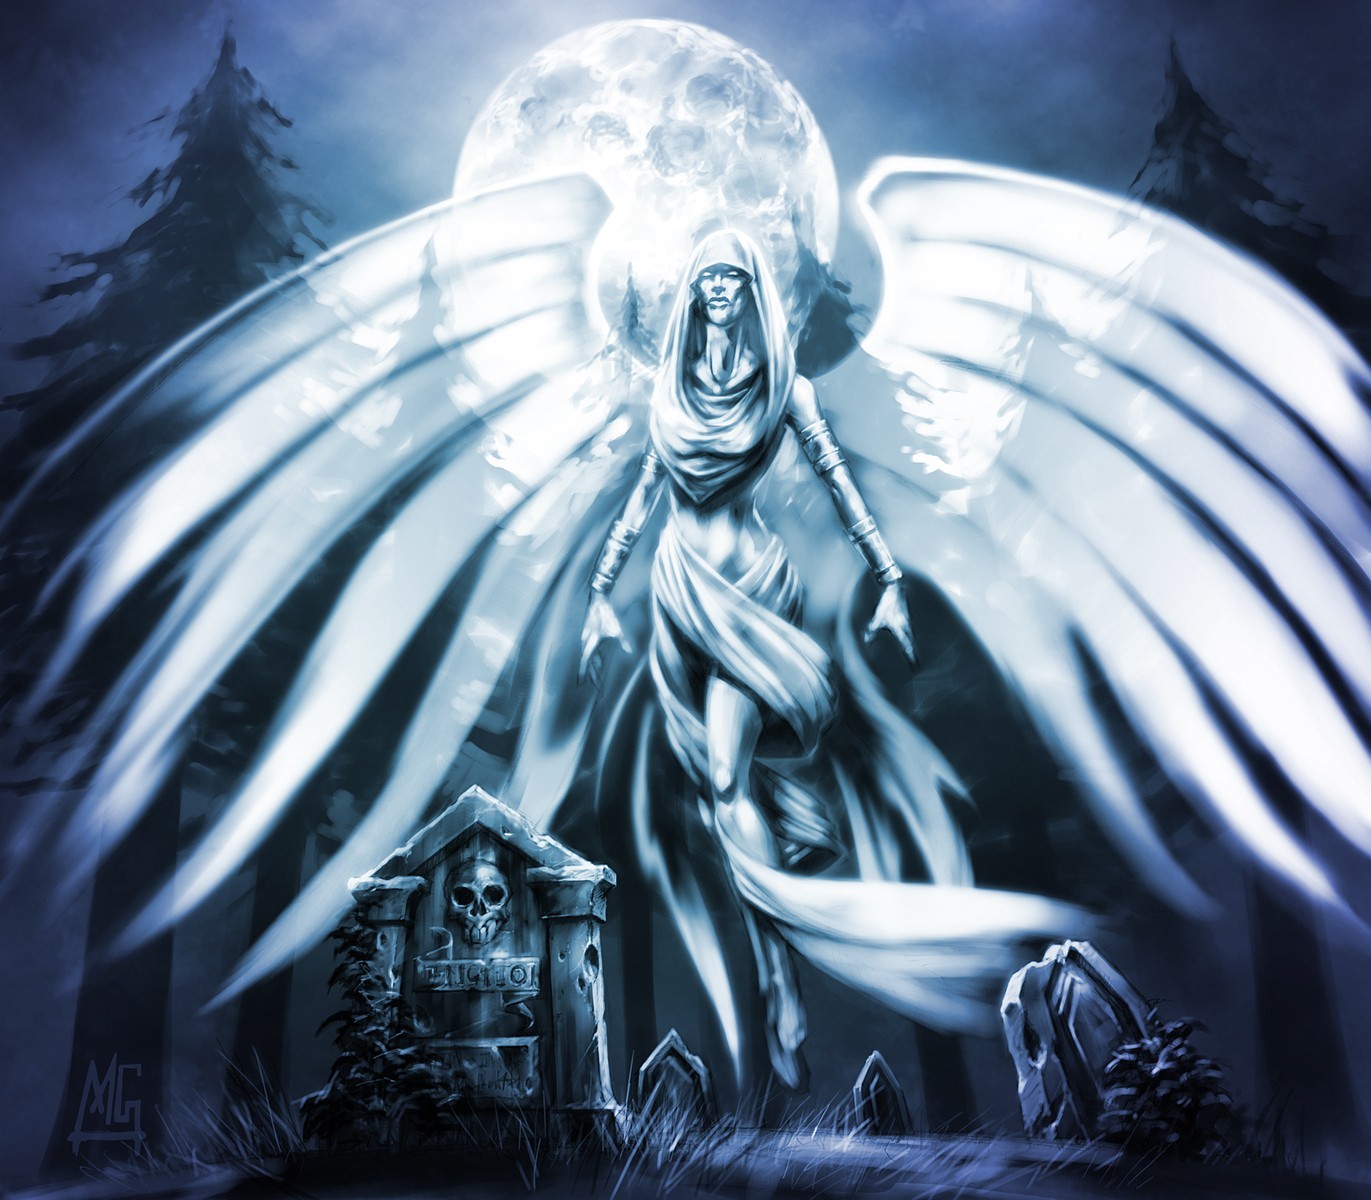 General 1371x1200 fantasy art Moon graveyards night wings World of Warcraft: Wrath of the Lich King video games PC gaming video game art